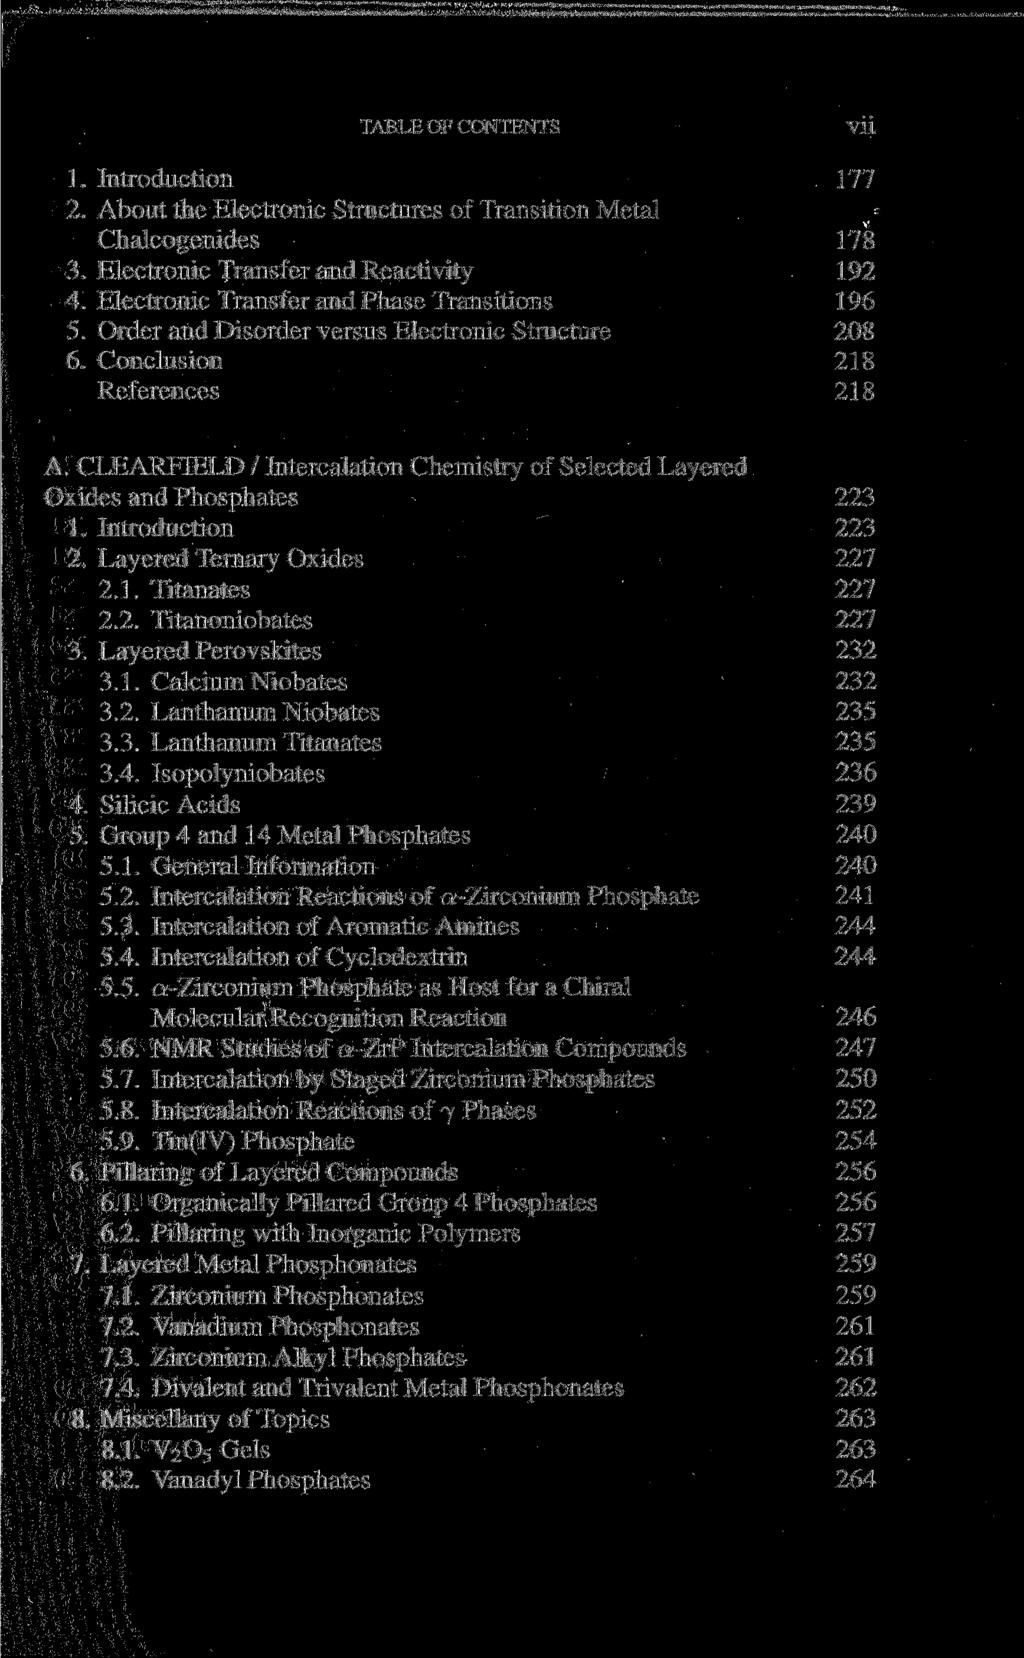 TABLE OF CONTENTS V11 1. Introduction 177 2. About the Electronic Structures of Transition Metal Chalcogenides 178 3. Electronic Transfer and Reactivity 192 4.